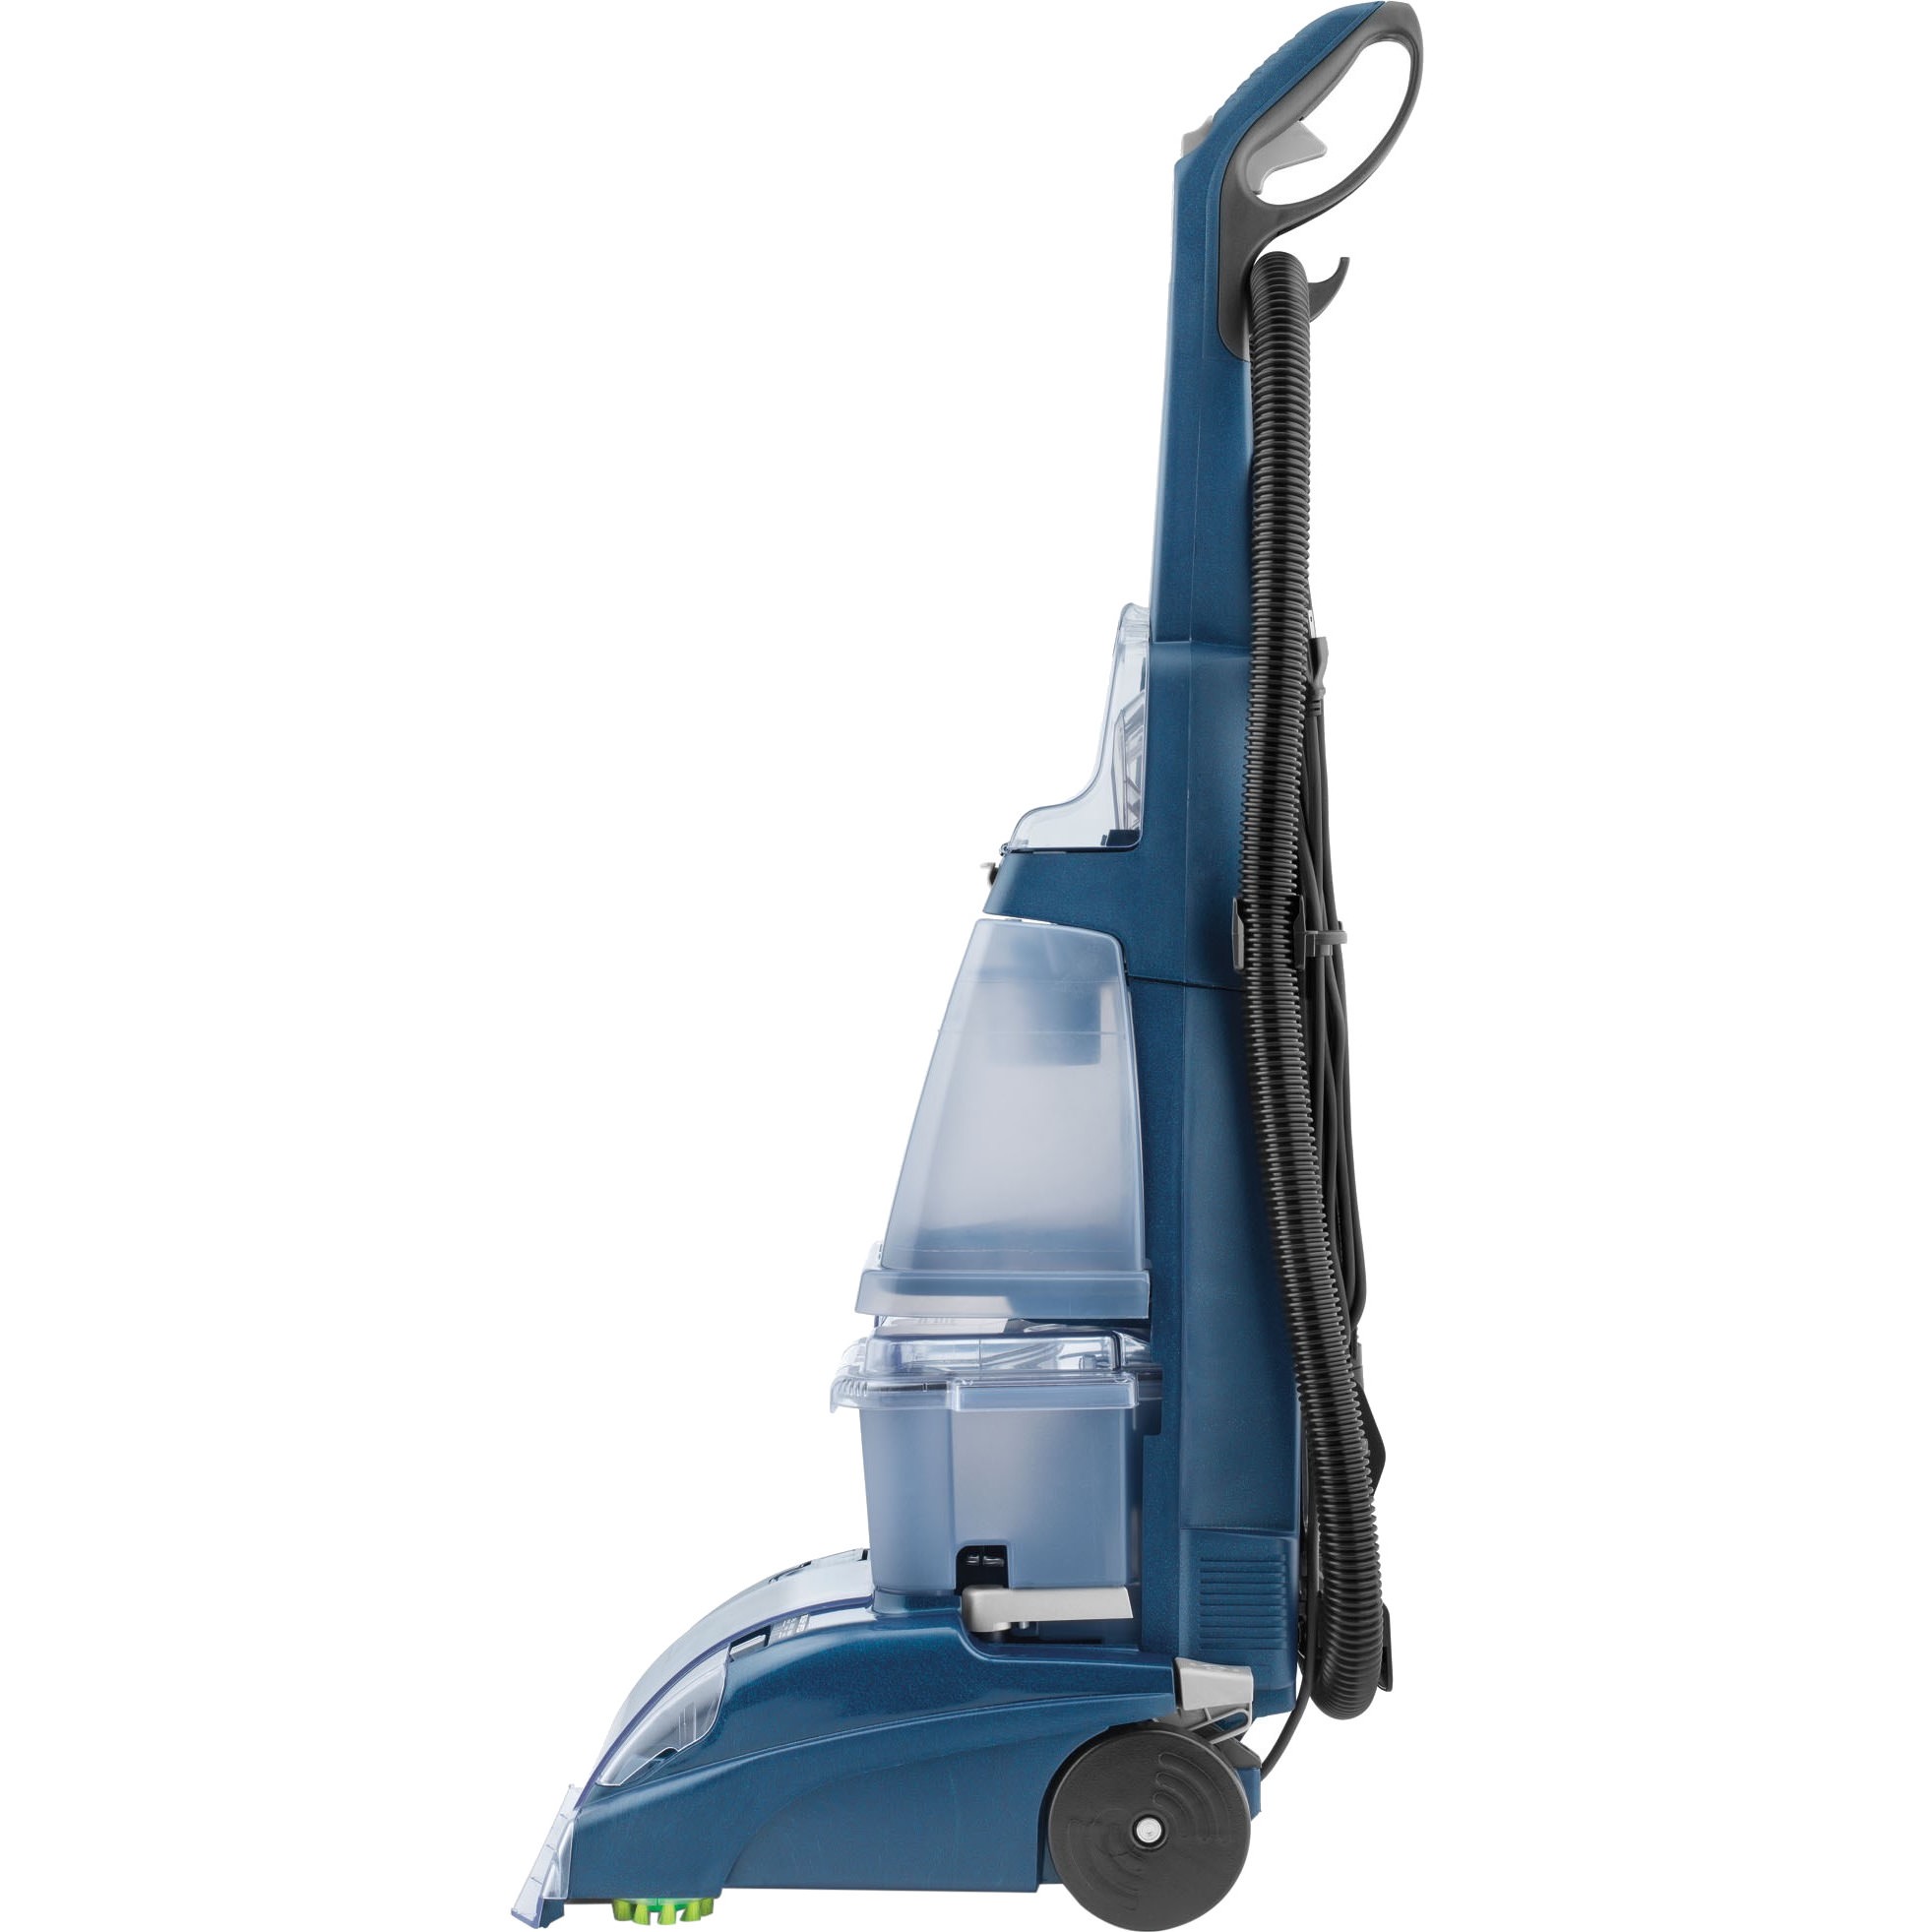 Hoover SteamVac SpinScrub with CleanSurge Carpet Cleaner, F5915905 - image 2 of 5